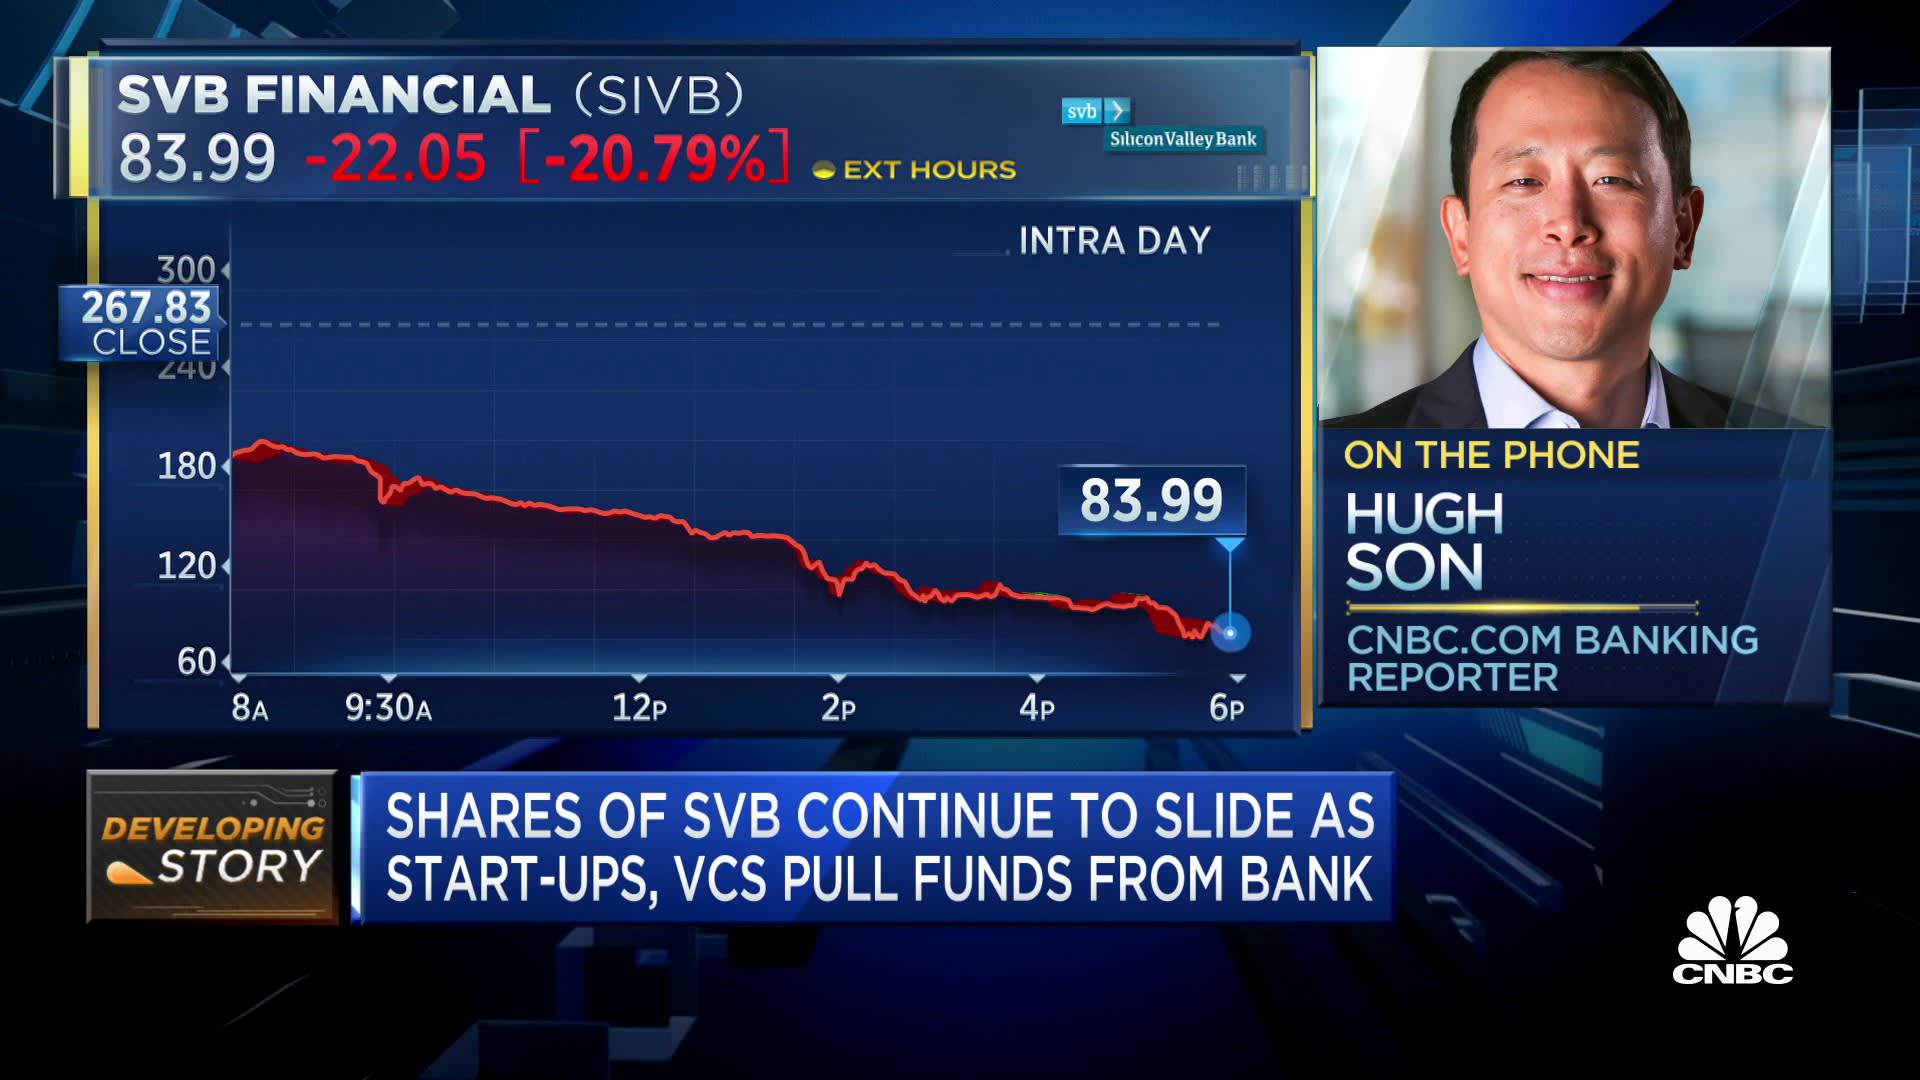 Shares of SIVB continue to slide as VCs pull money from the bank